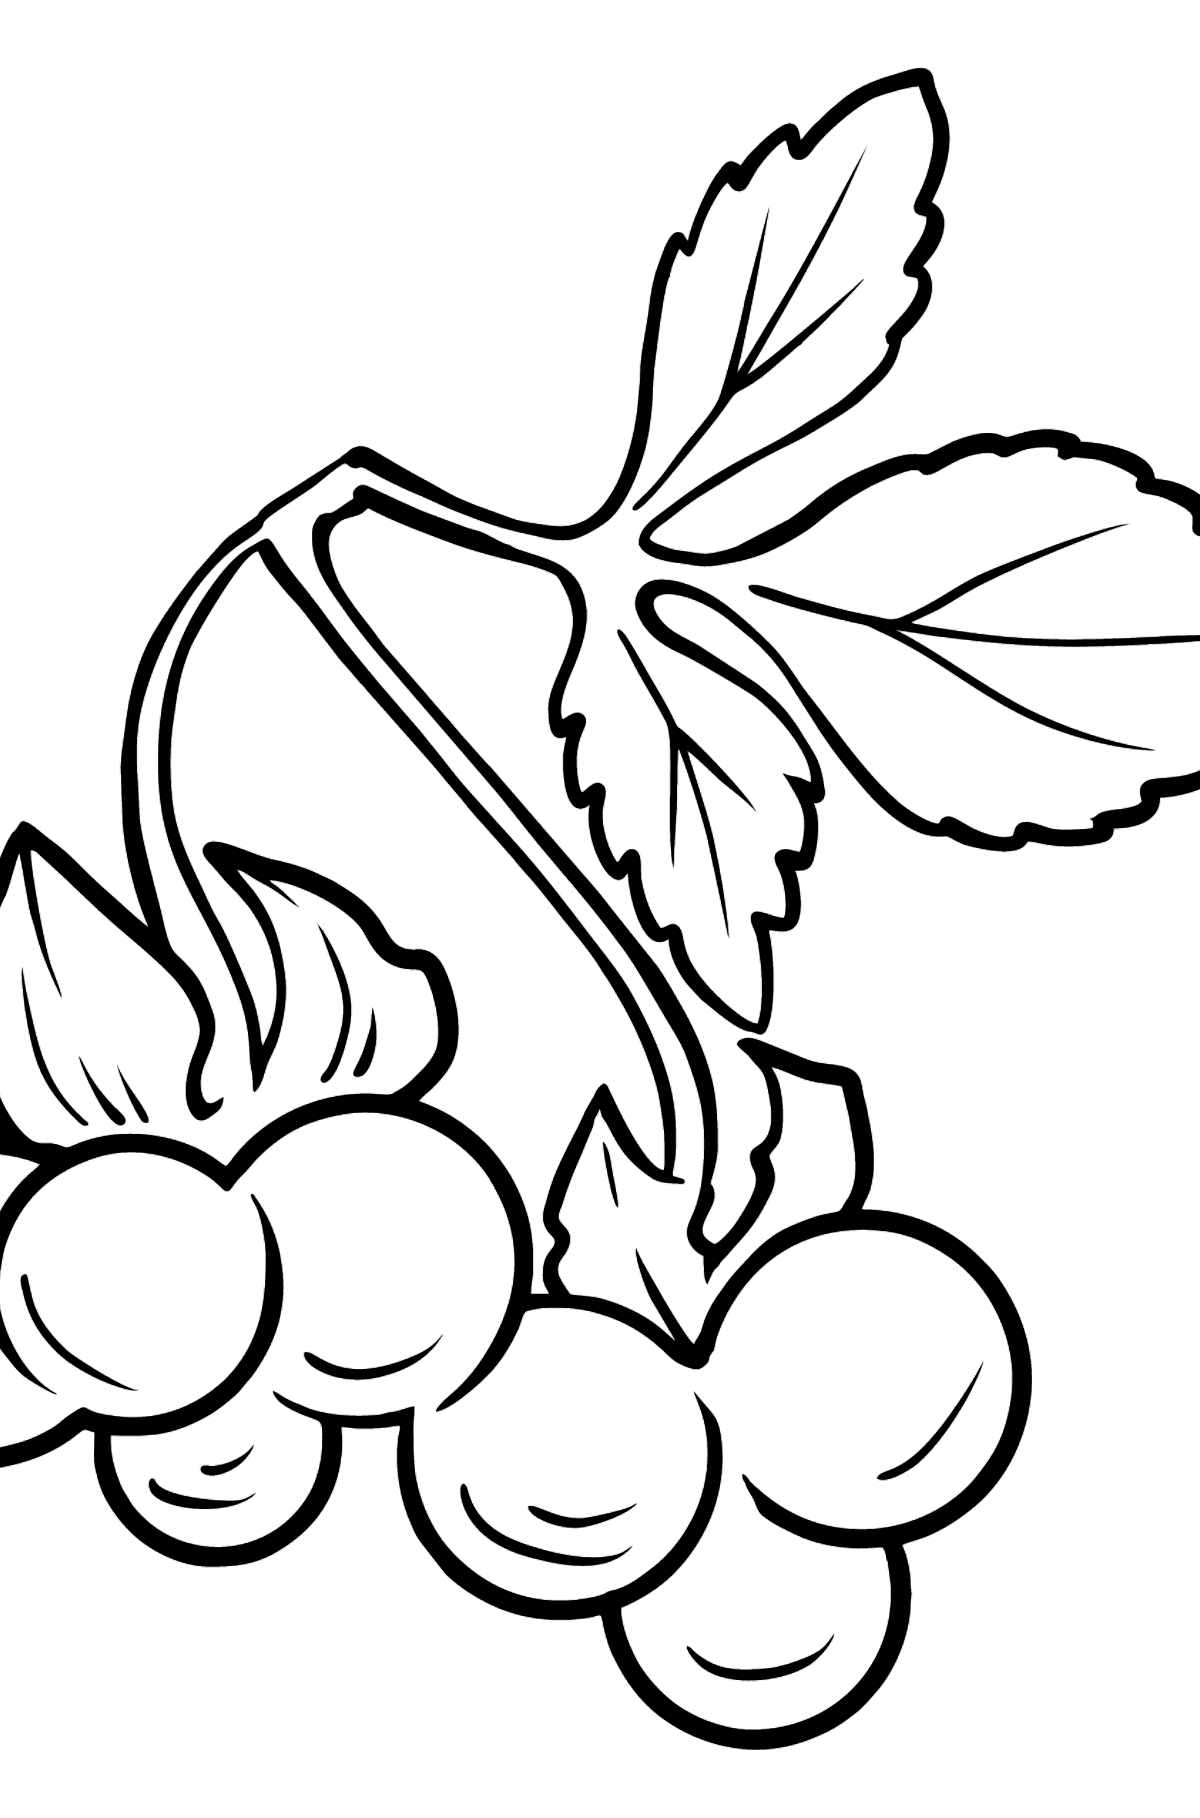 Blackberry coloring page - Coloring Pages for Kids